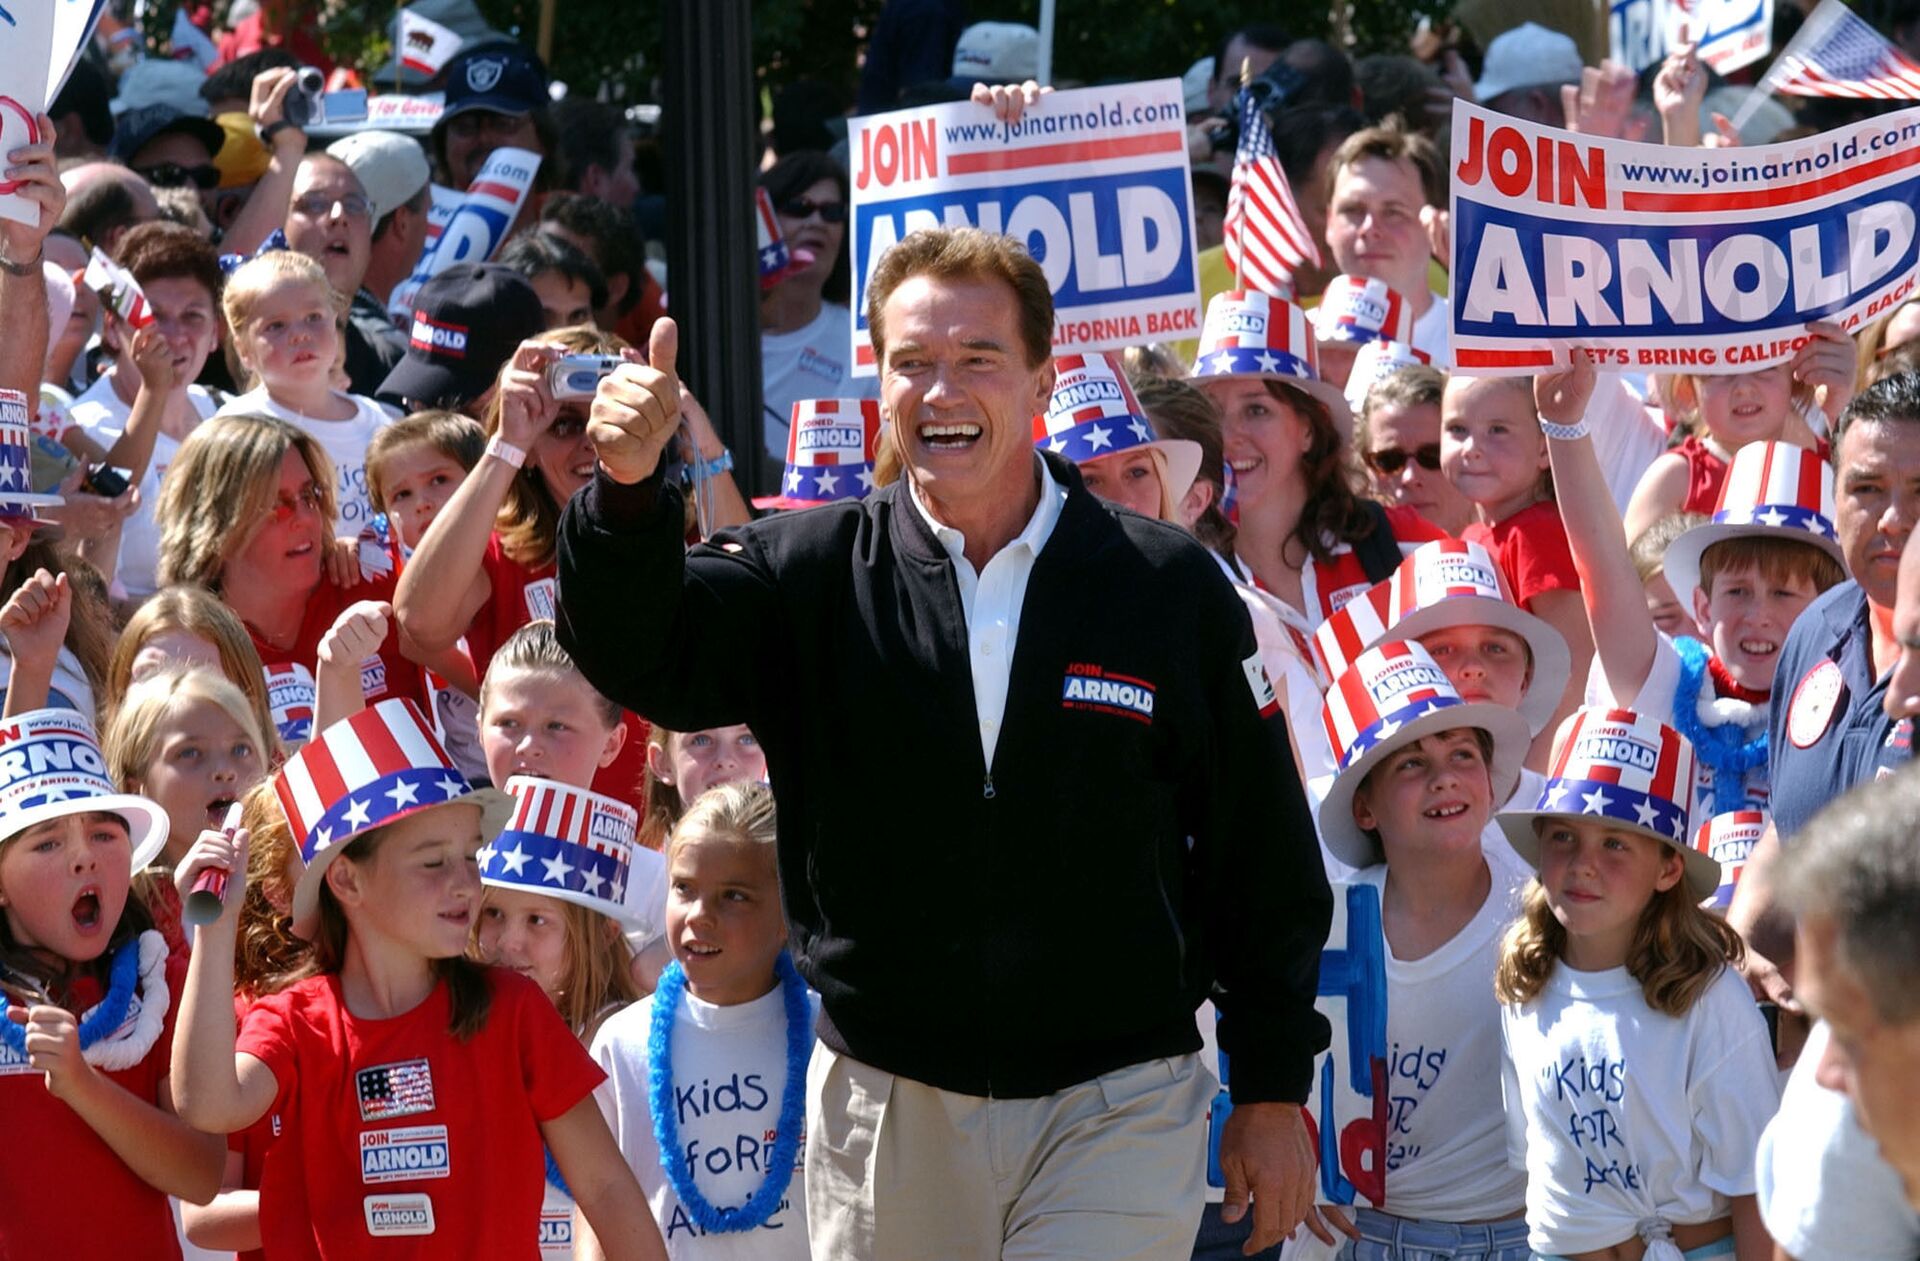  In this Oct. 5, 2003, file photo, Republican candidate for California governor Arnold Schwarzenegger walks up the steps to the state Capitol surrounded by children and waving to supporters during a campaign rally in Sacramento, Calif. California Gov. Gavin Newsom is facing a possible recall election as the nation's most populous state struggles to emerge from the coronavirus crisis - Sputnik International, 1920, 14.09.2021